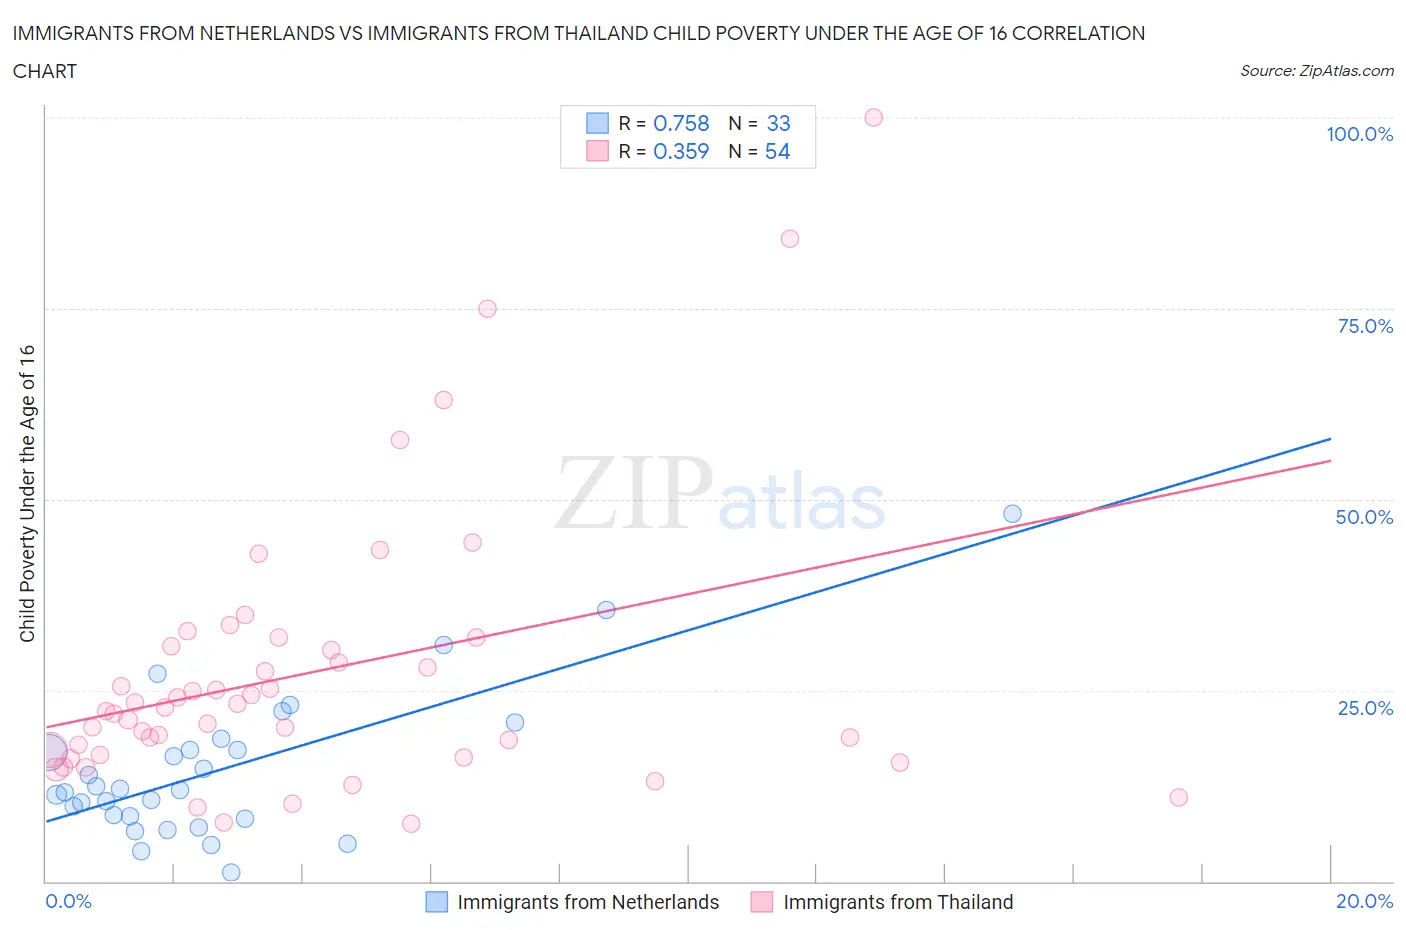 Immigrants from Netherlands vs Immigrants from Thailand Child Poverty Under the Age of 16